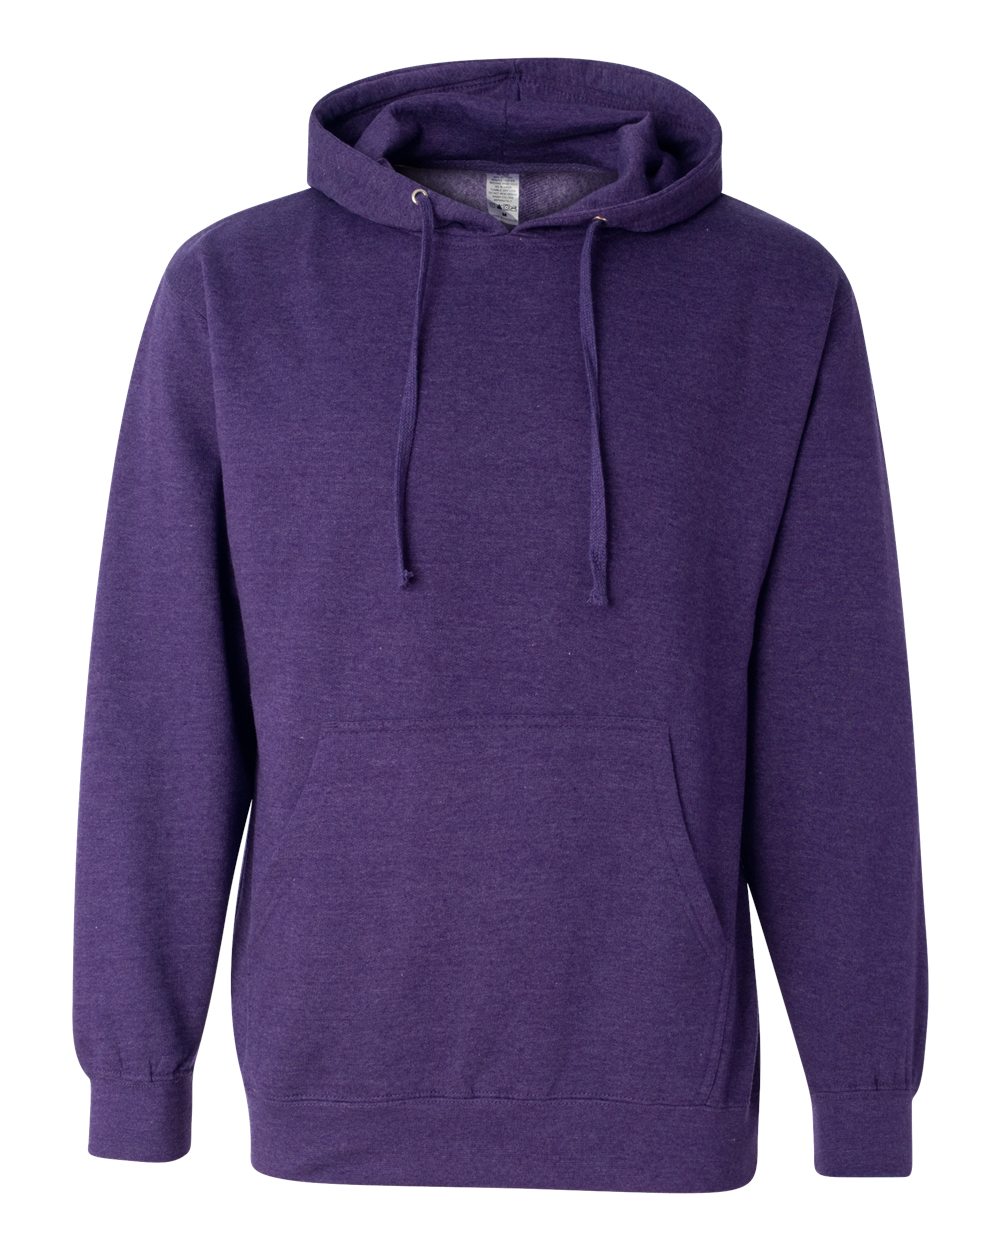 Independent Trading Co. - Midweight Hooded Sweatshirt - SS4500 | eBay